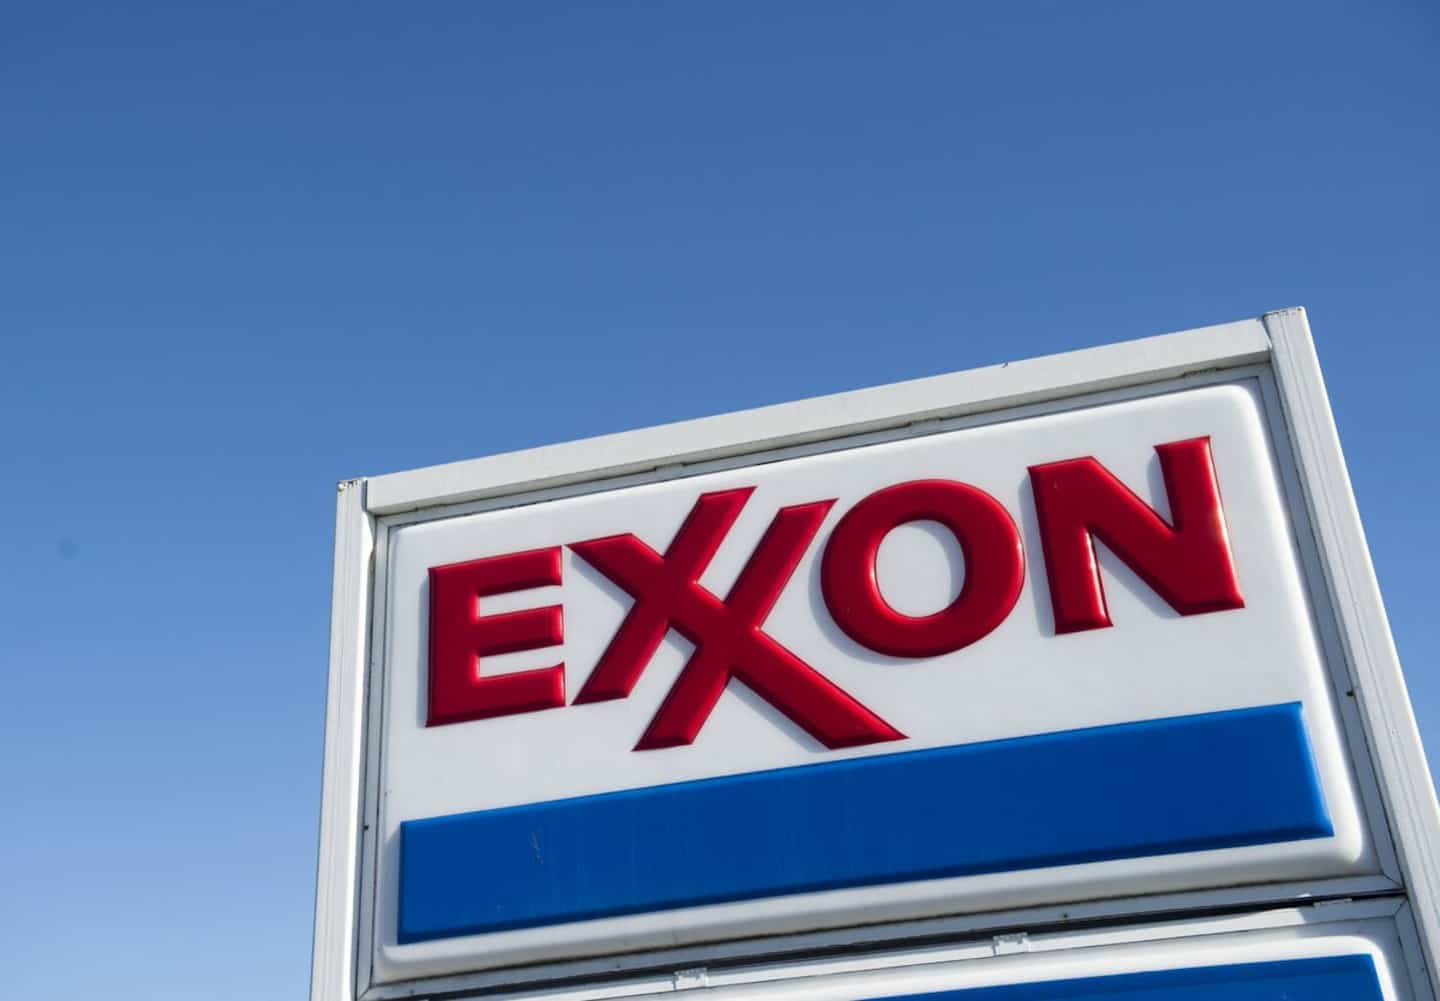 ExxonMobil wants to block the taxation of the “surplus profits” of the energy giants in Europe